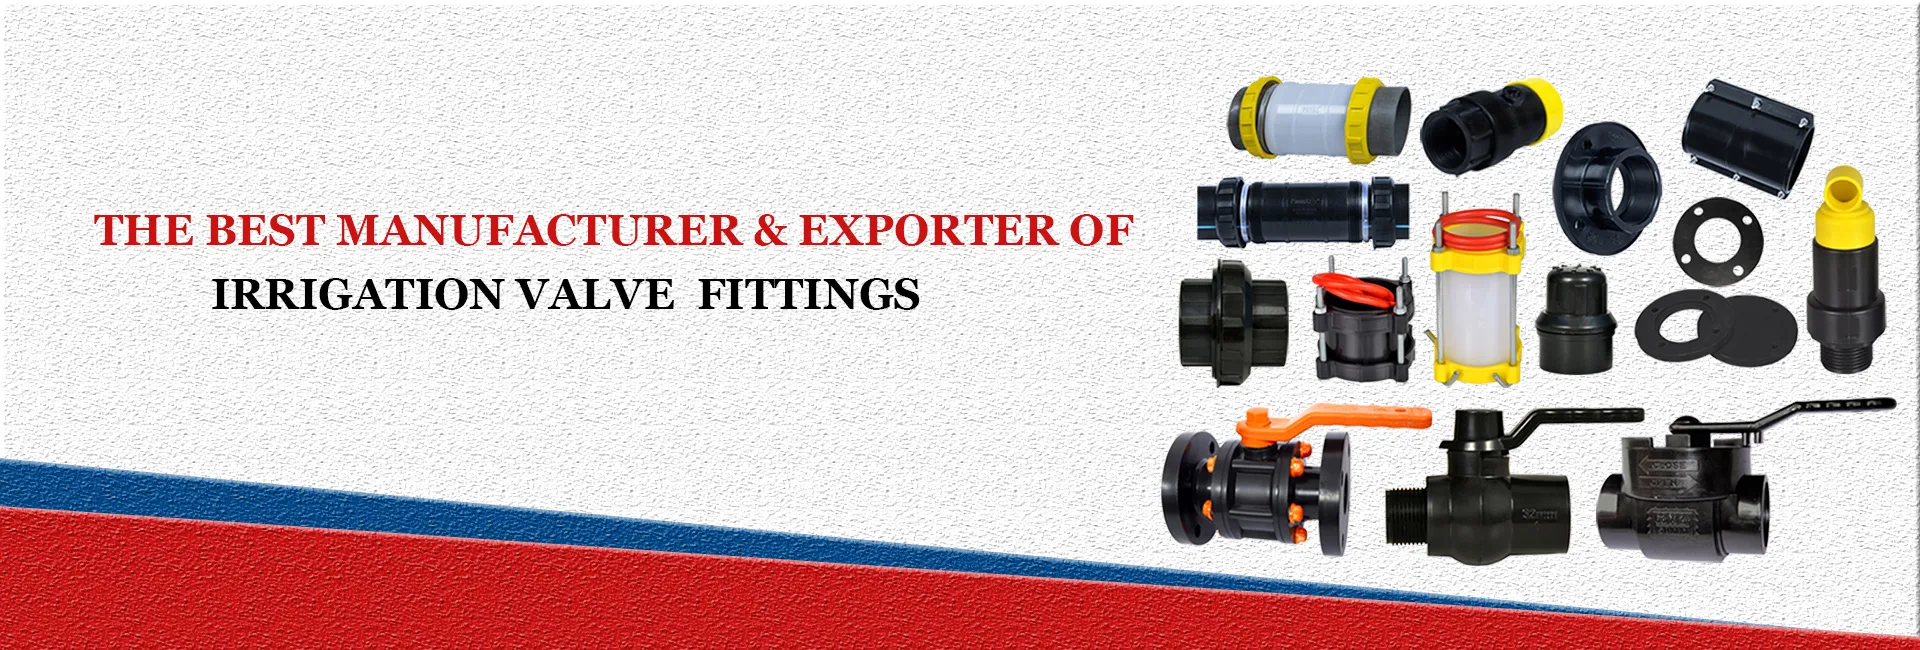 irrigation valve fittings price in india